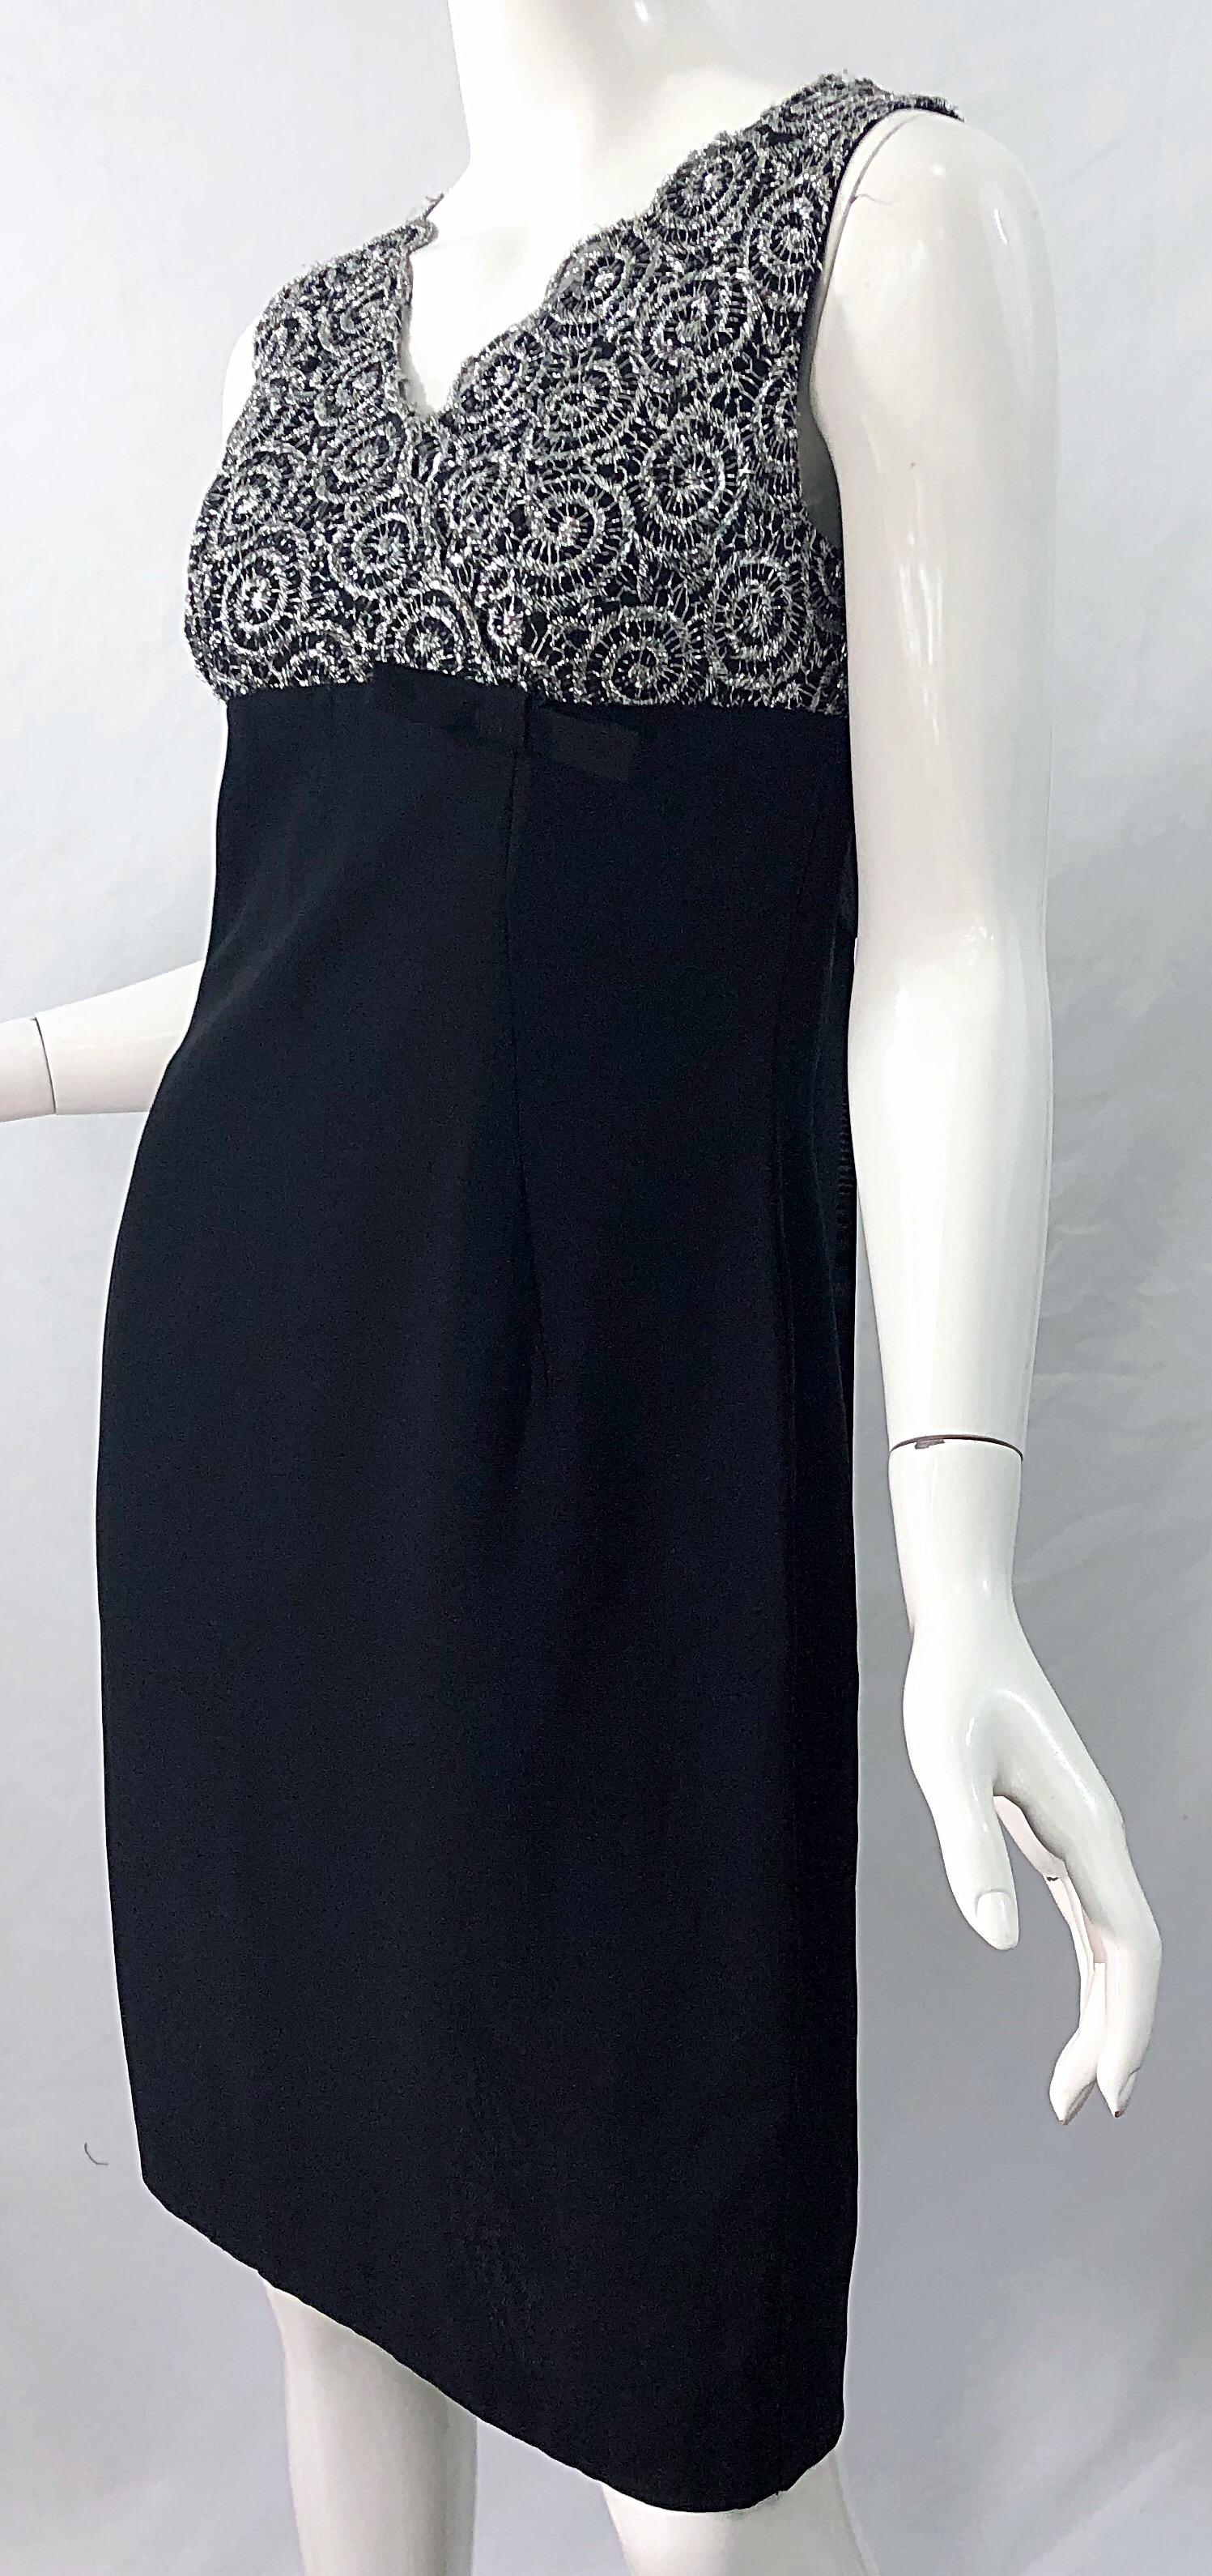 Chic 1960s Black and Silver Metallic Lace Rayon Crepe Vintage 60s Sheath Dress For Sale 7